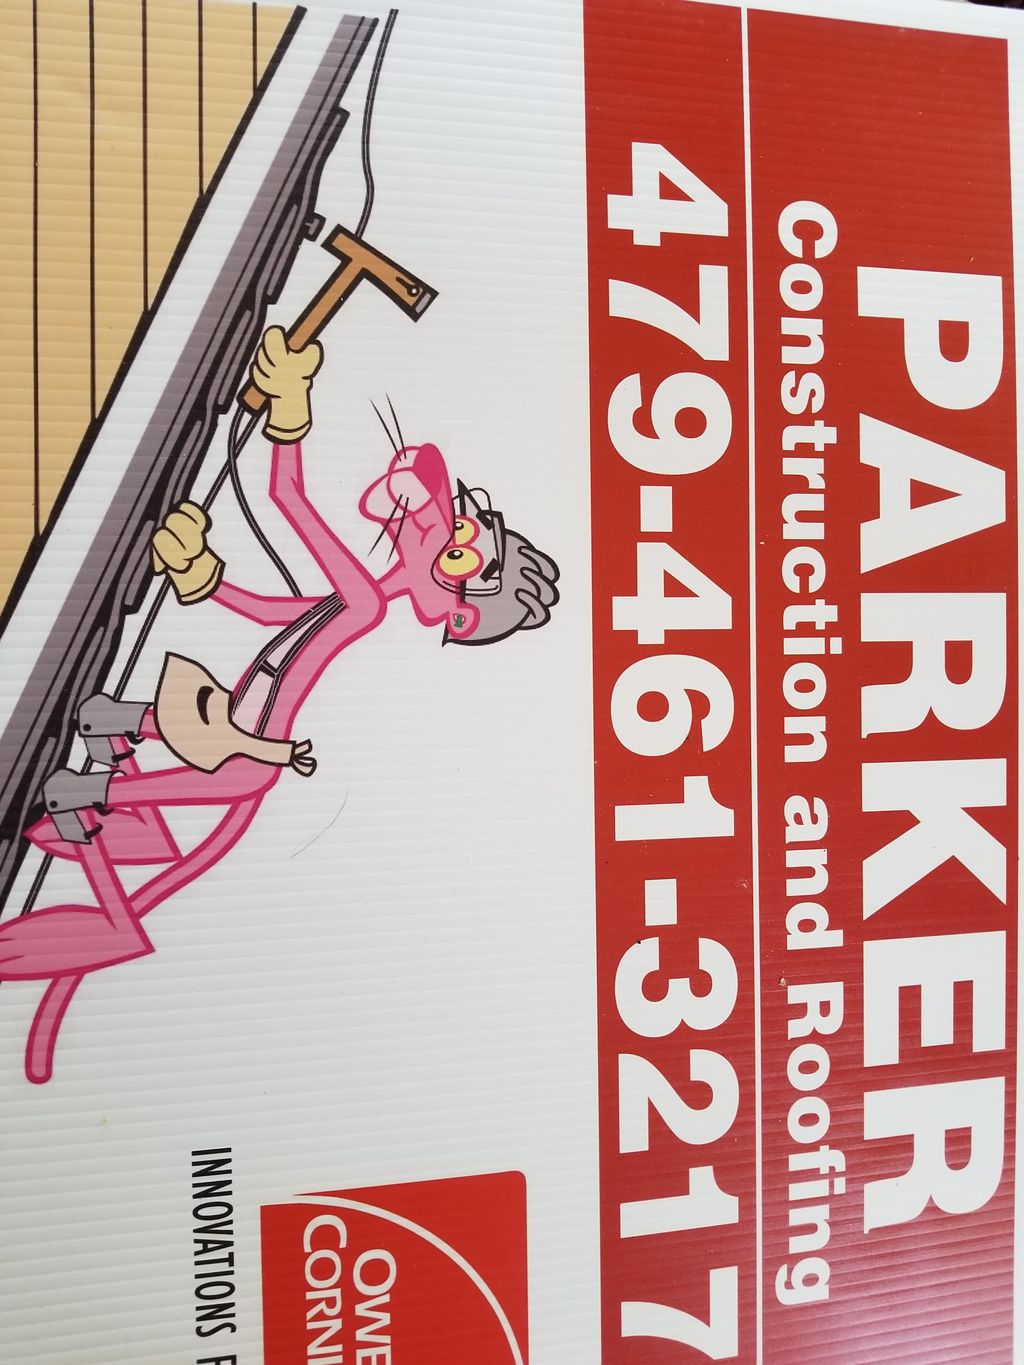 PARKER CONSTRUCTION & ROOFING